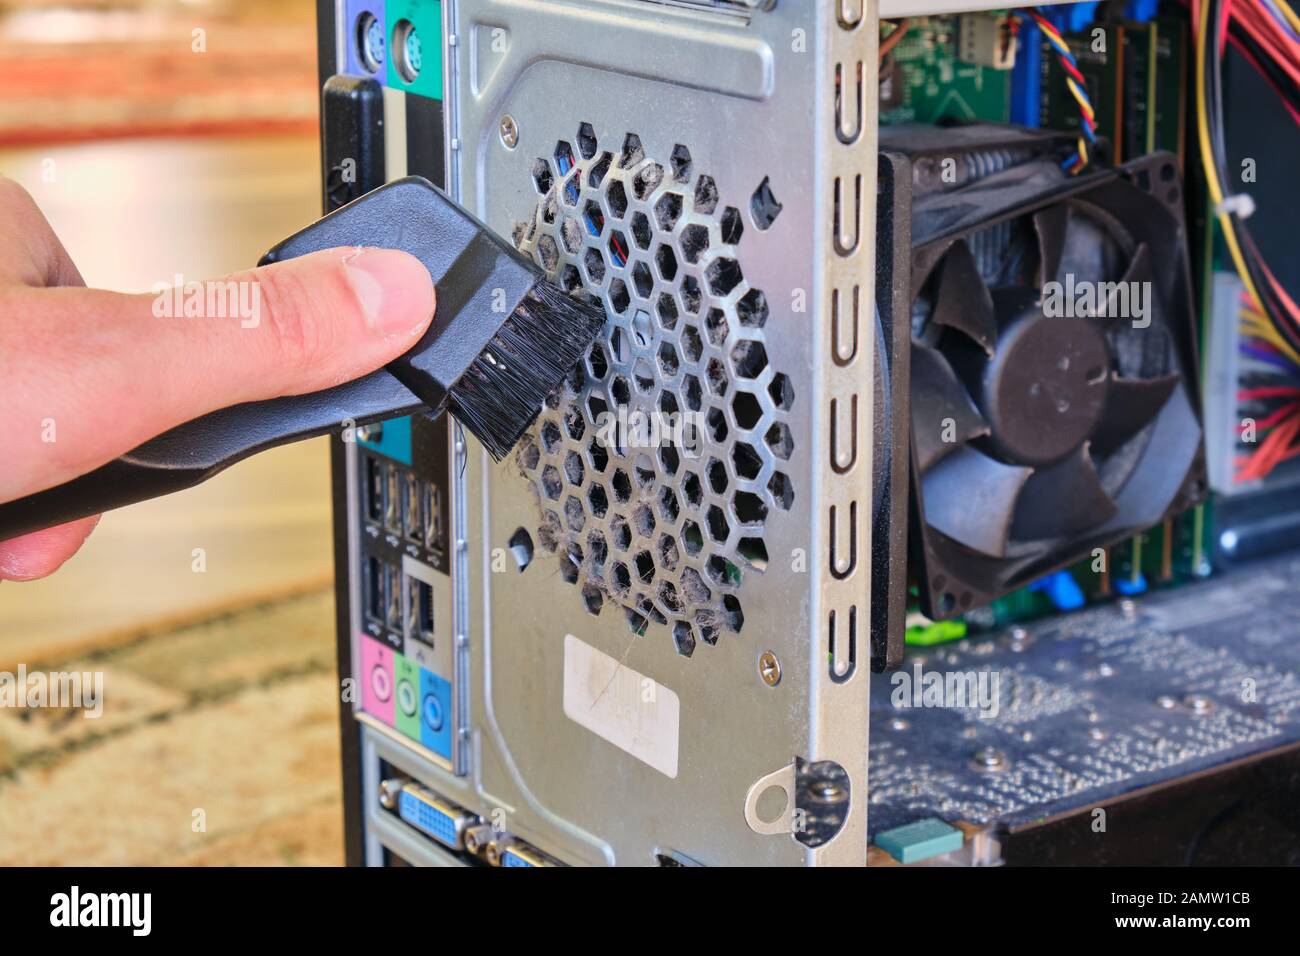 Cleaning dust from a cooler inside a computer case, using a small vacuum tube with a brush. PC maintenance concept. Stock Photo